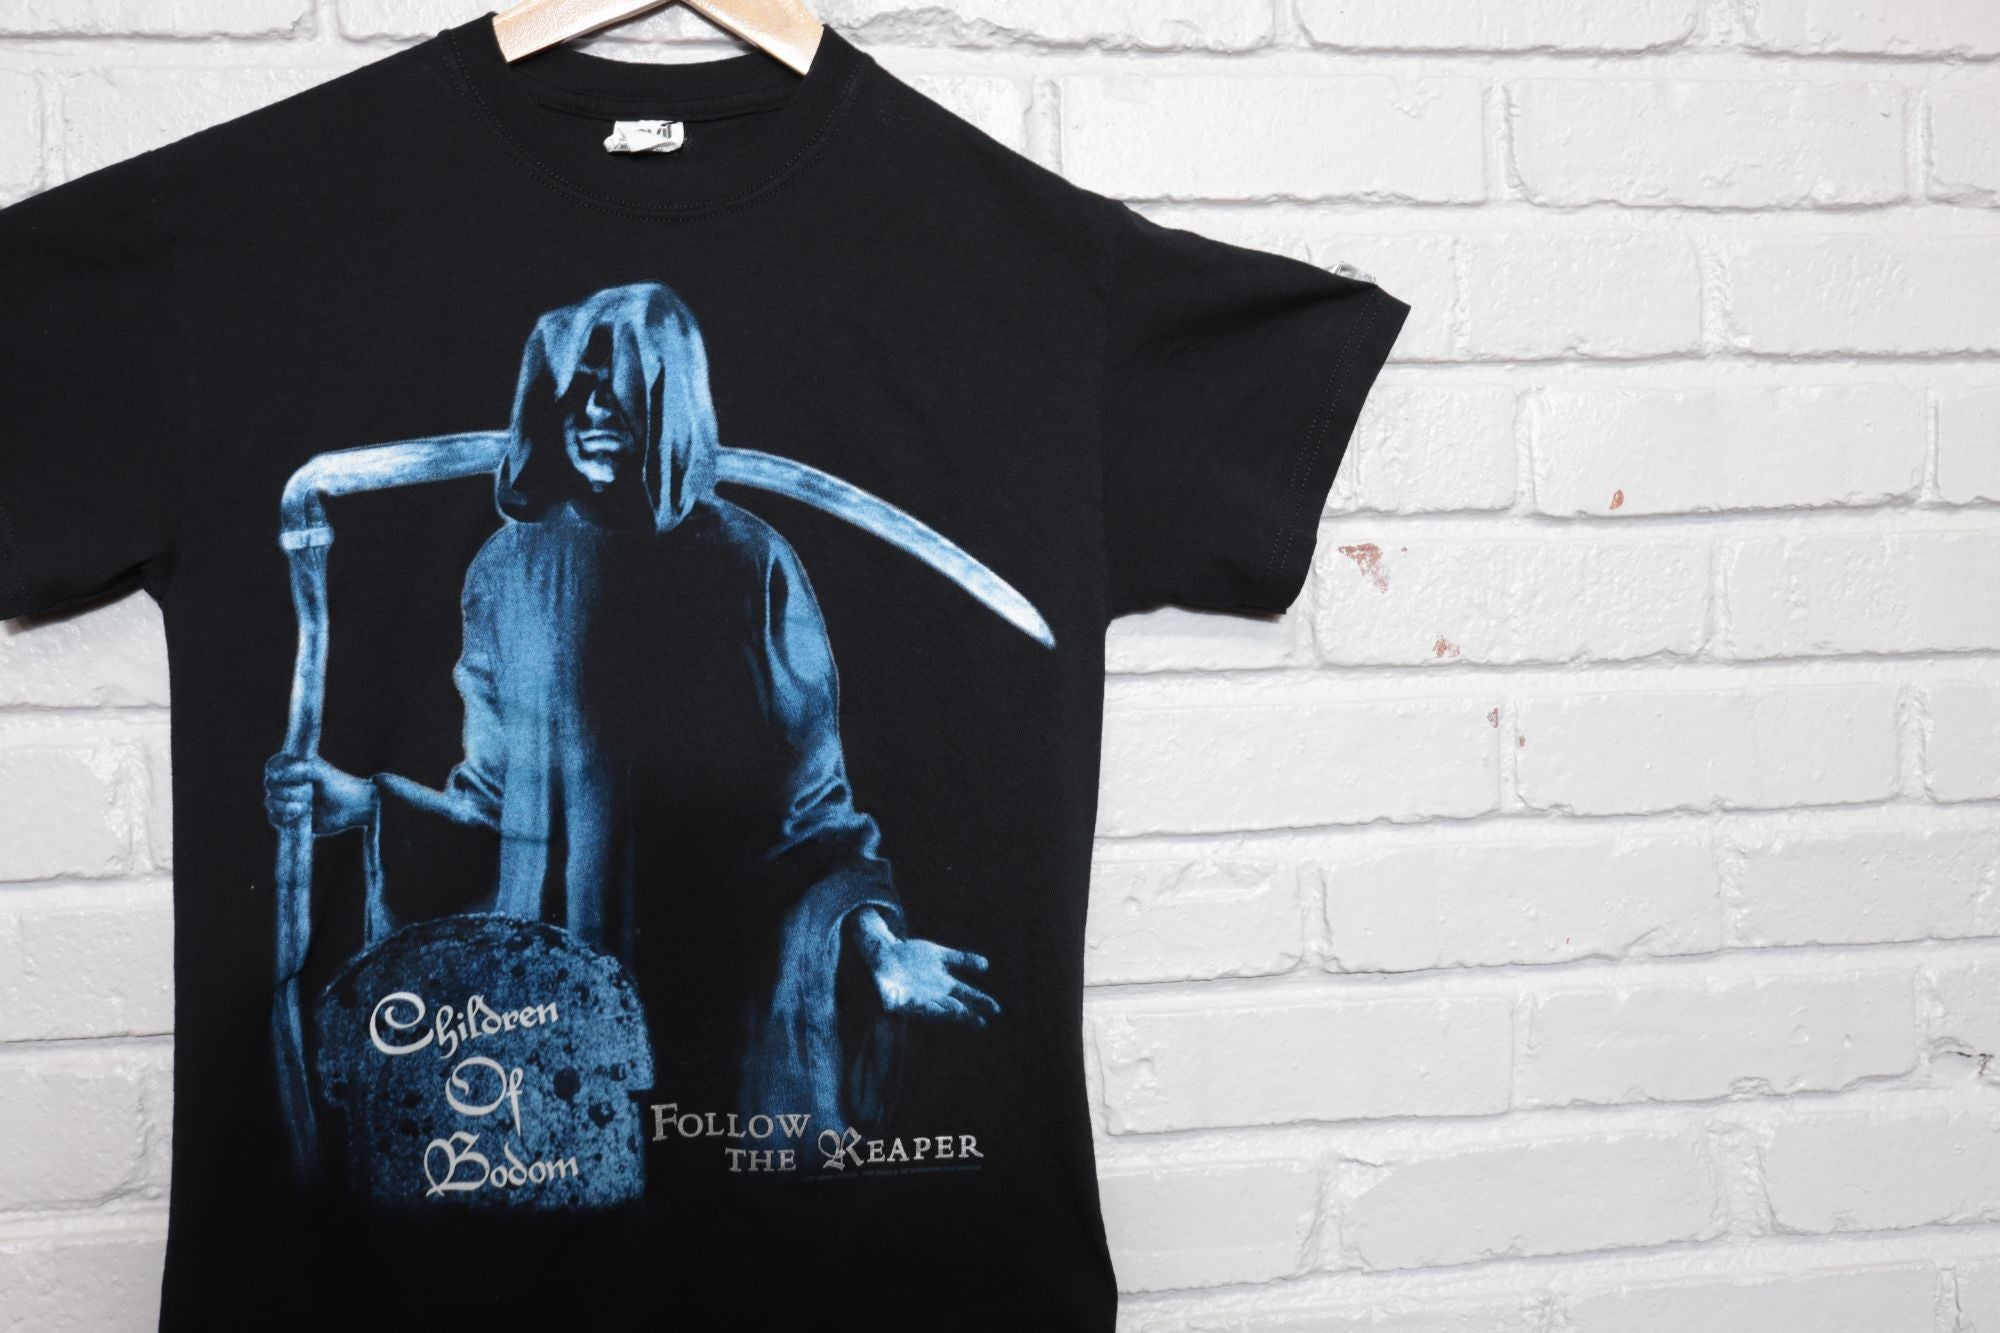 2010s children of bodom follow the reaper tee shirt size small – Recollect  Ltd.